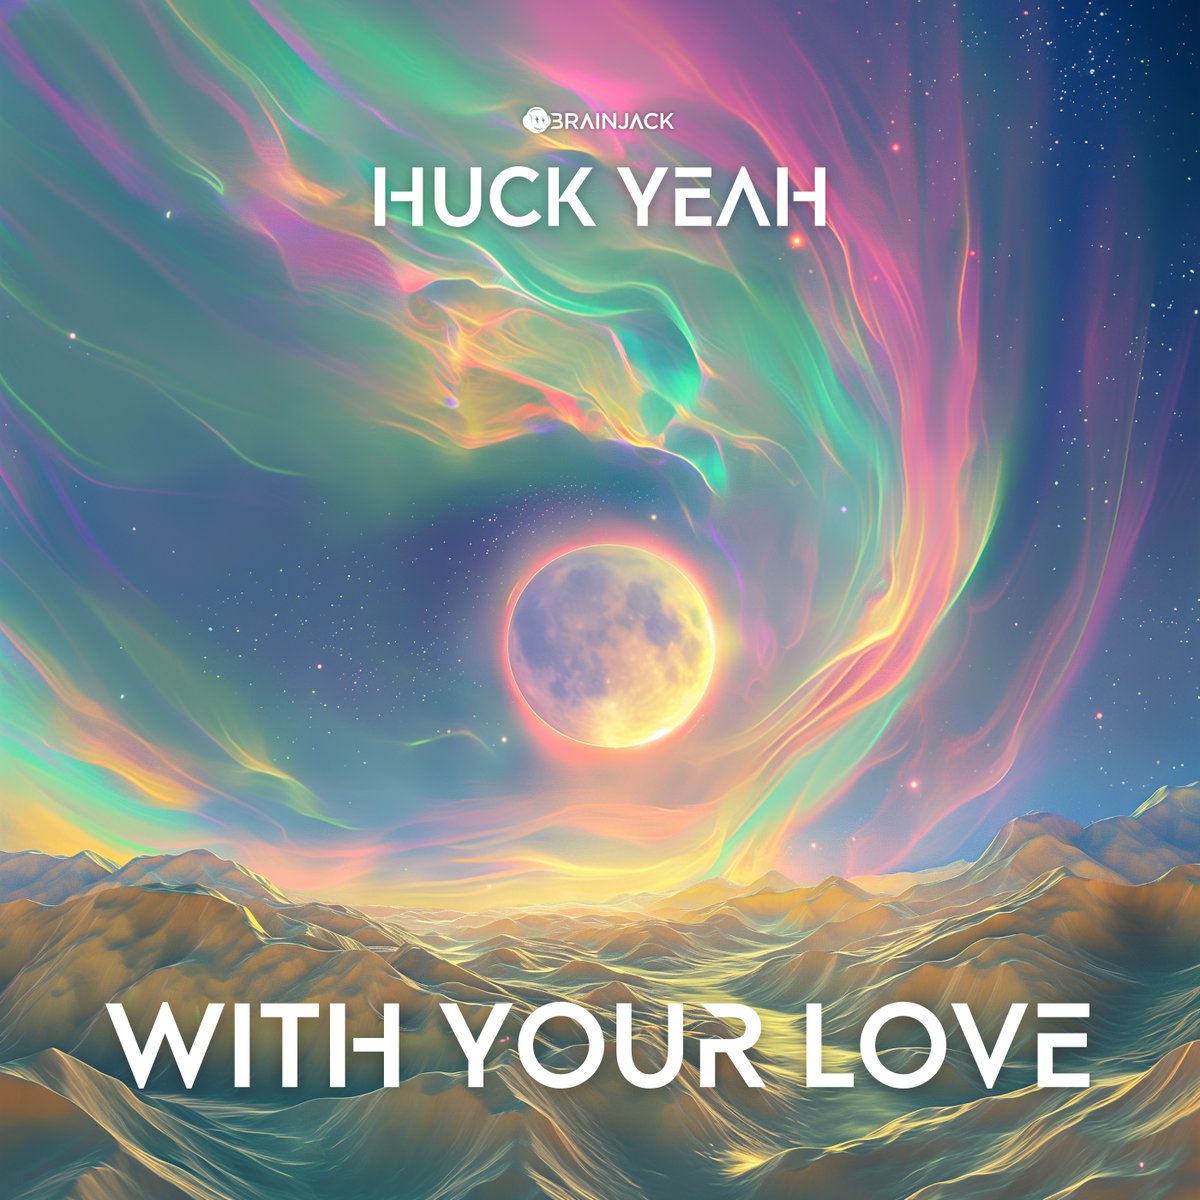 It’s time to listen to your heart, because Huck Yeah - With Your Love is out tomorrow!

Pre-save it at the link in bio⚡️
.
.
.
.
.
#newmusic #melodictechno #techno #house #deephouse #melodichouse #basshouse #edc #dancemusic #insomniac #brainjack